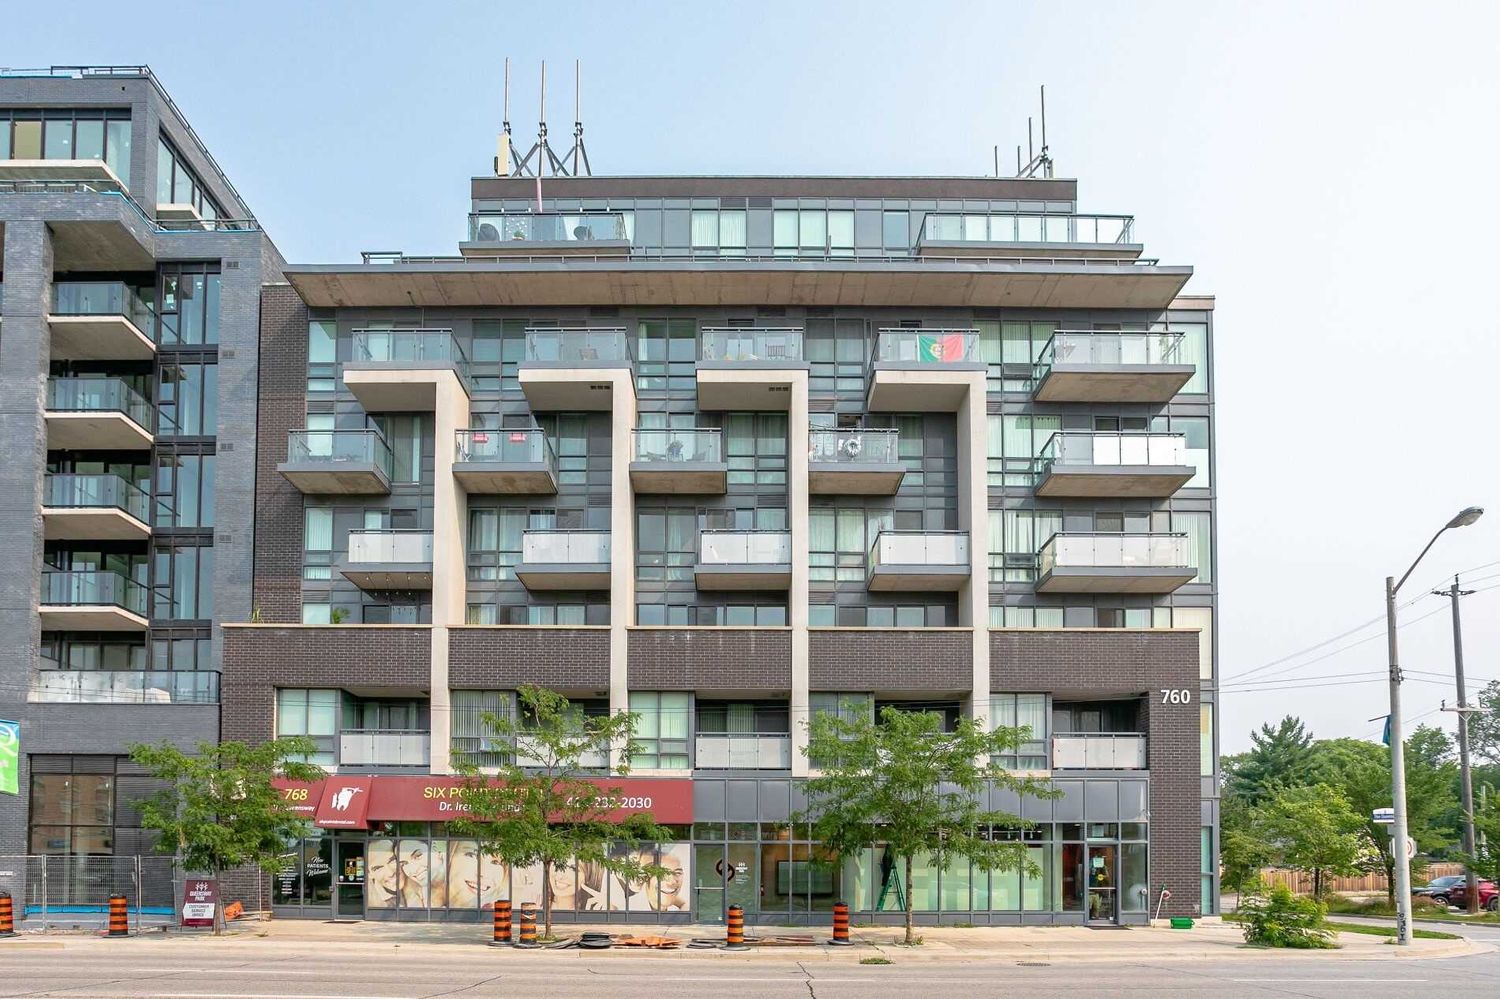 760 The Queensway. Qube Condos is located in  Etobicoke, Toronto - image #1 of 2